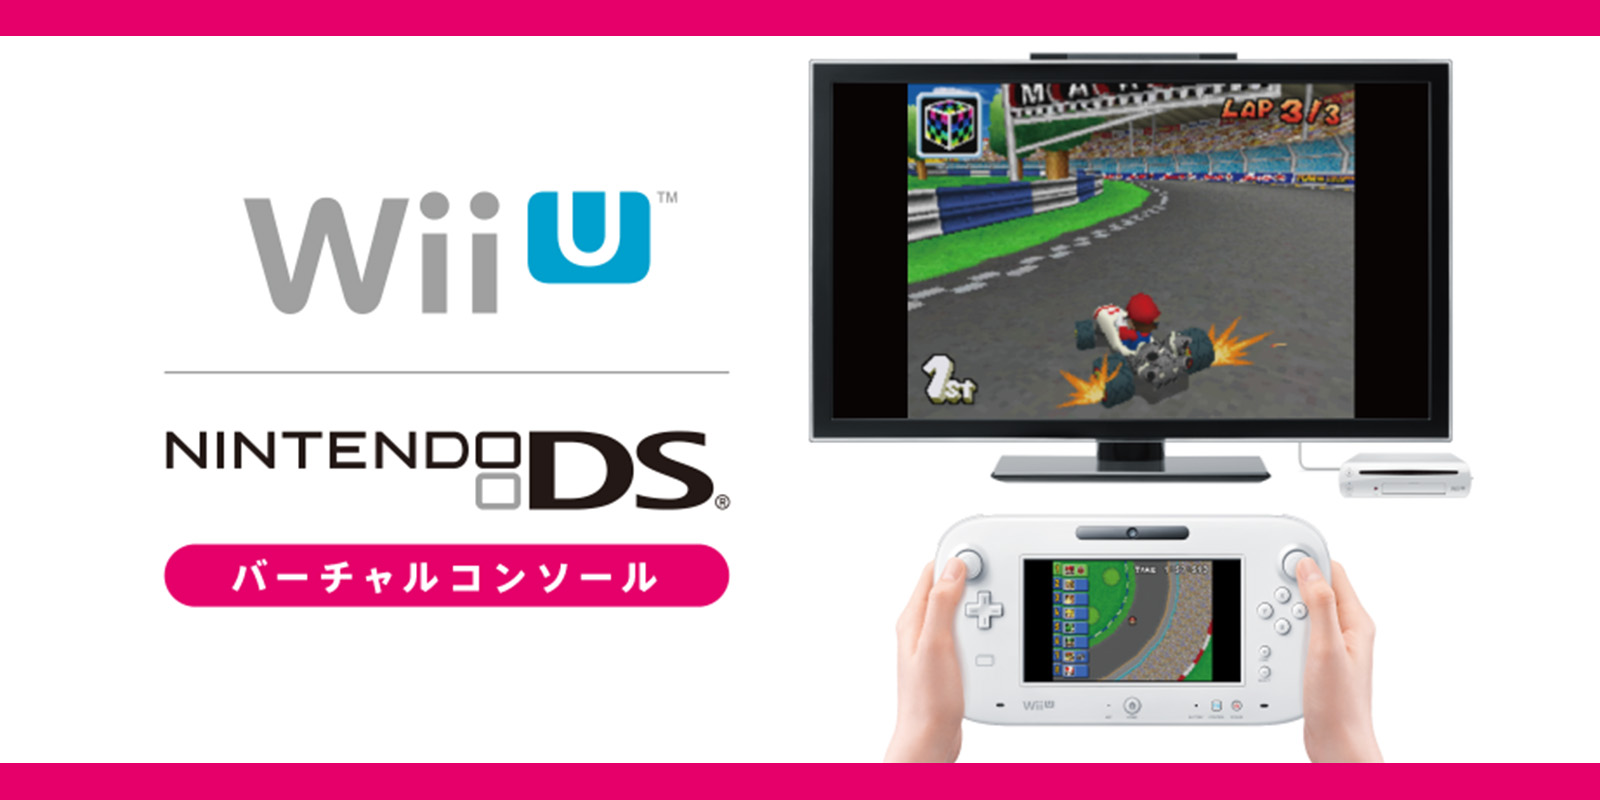 How To Play Nintendo DS Games On The Wii U